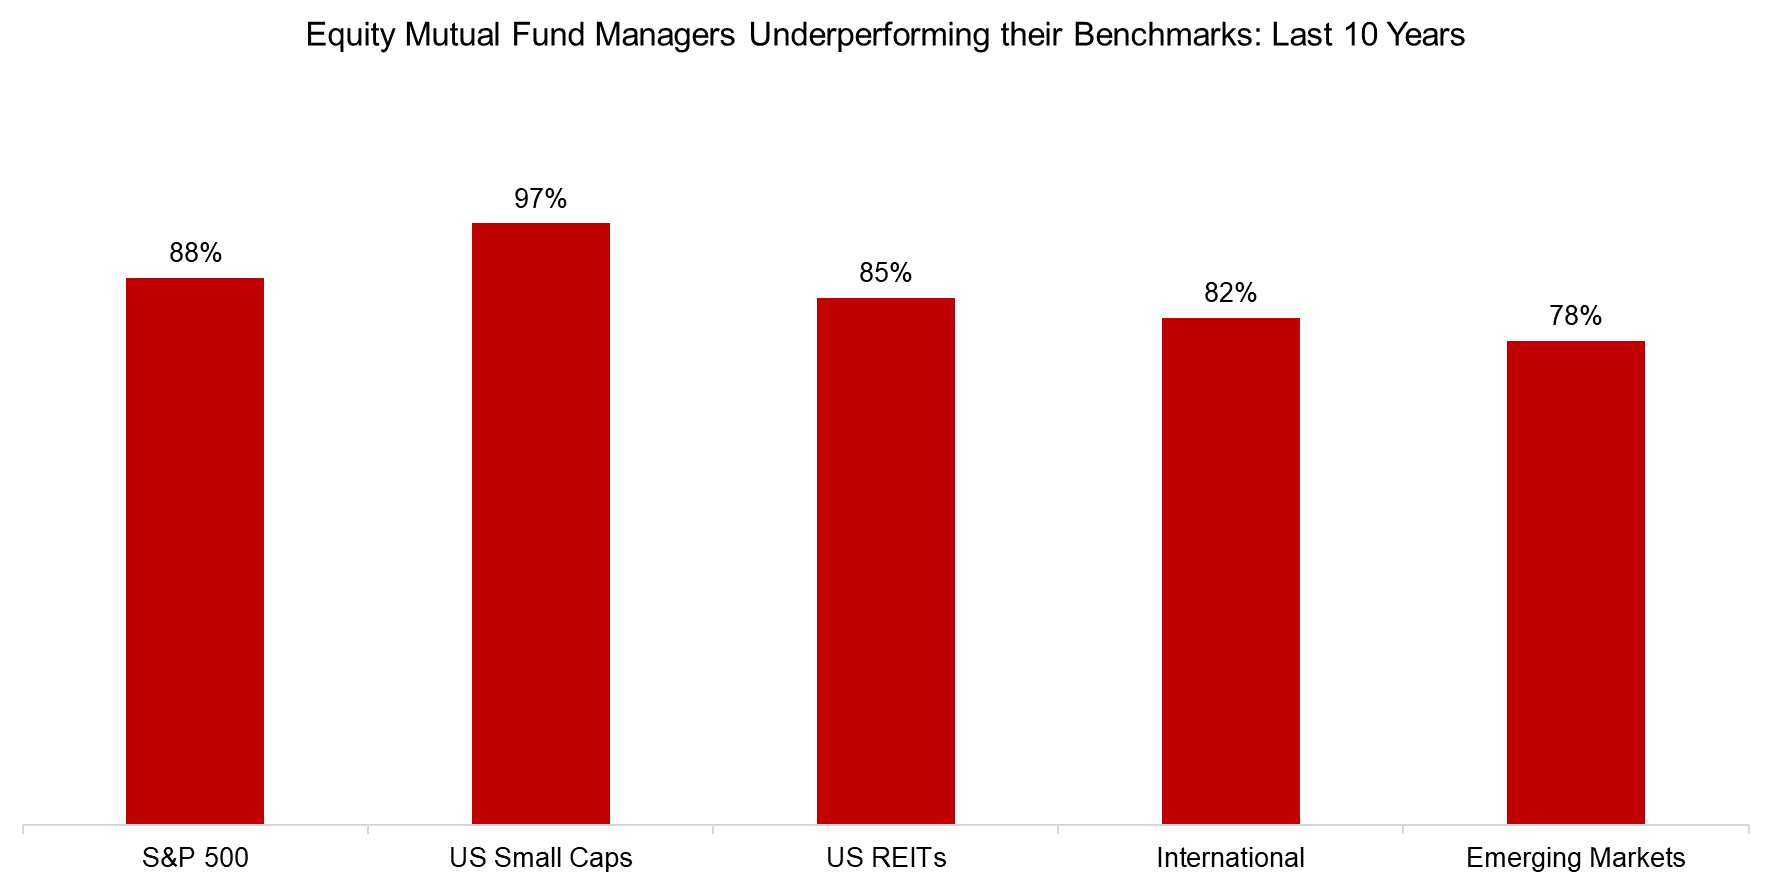 Equity Mutual Fund Managers Underperforming their Benchmarks Last 10 Years